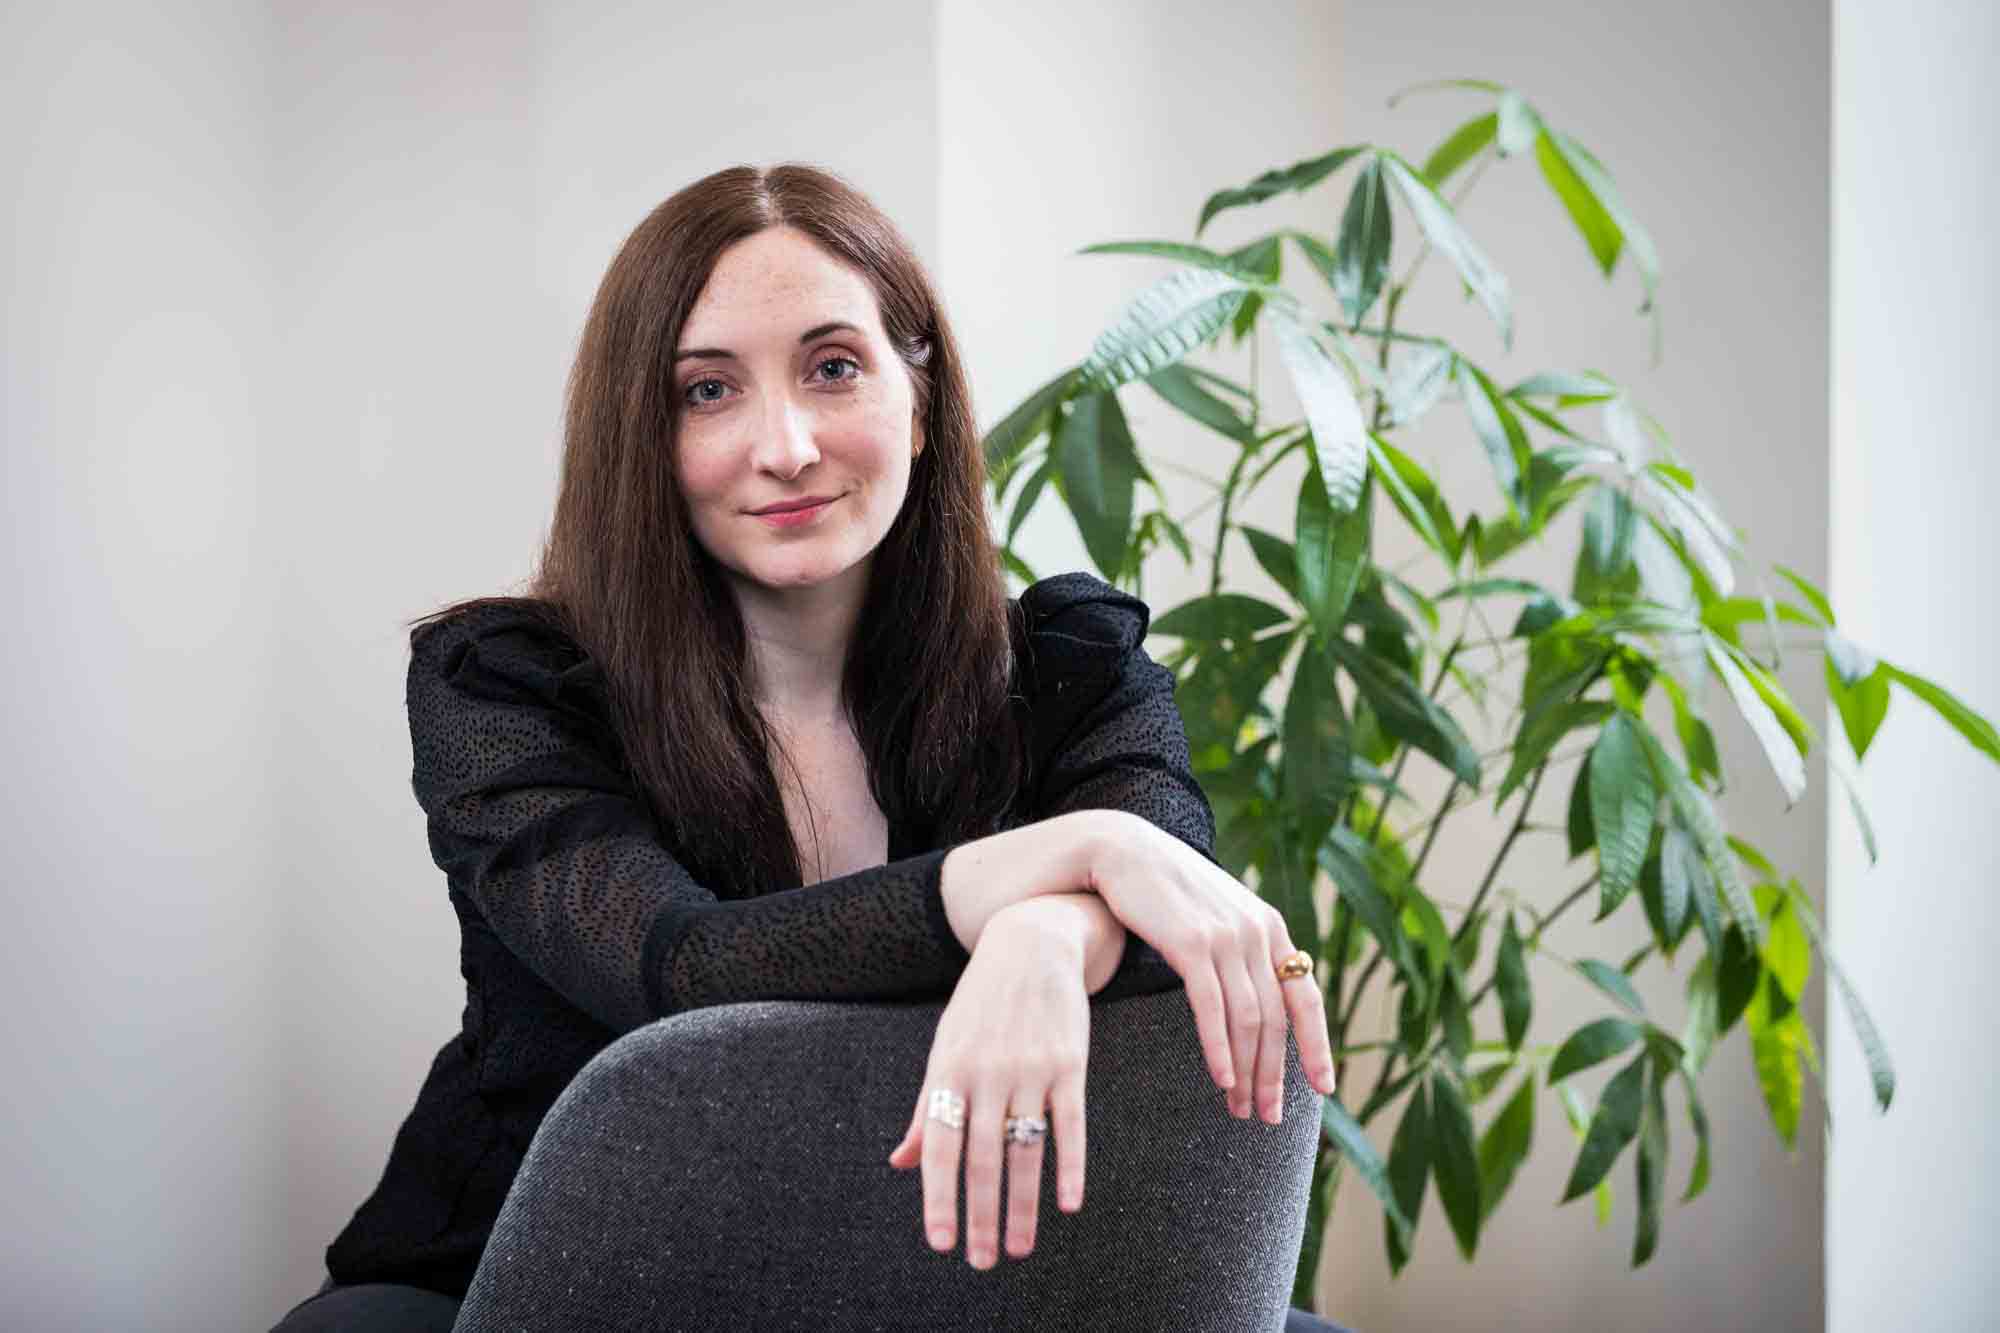 Female author wearing black blouse sitting in chair with plant for an article on professional headshot tips